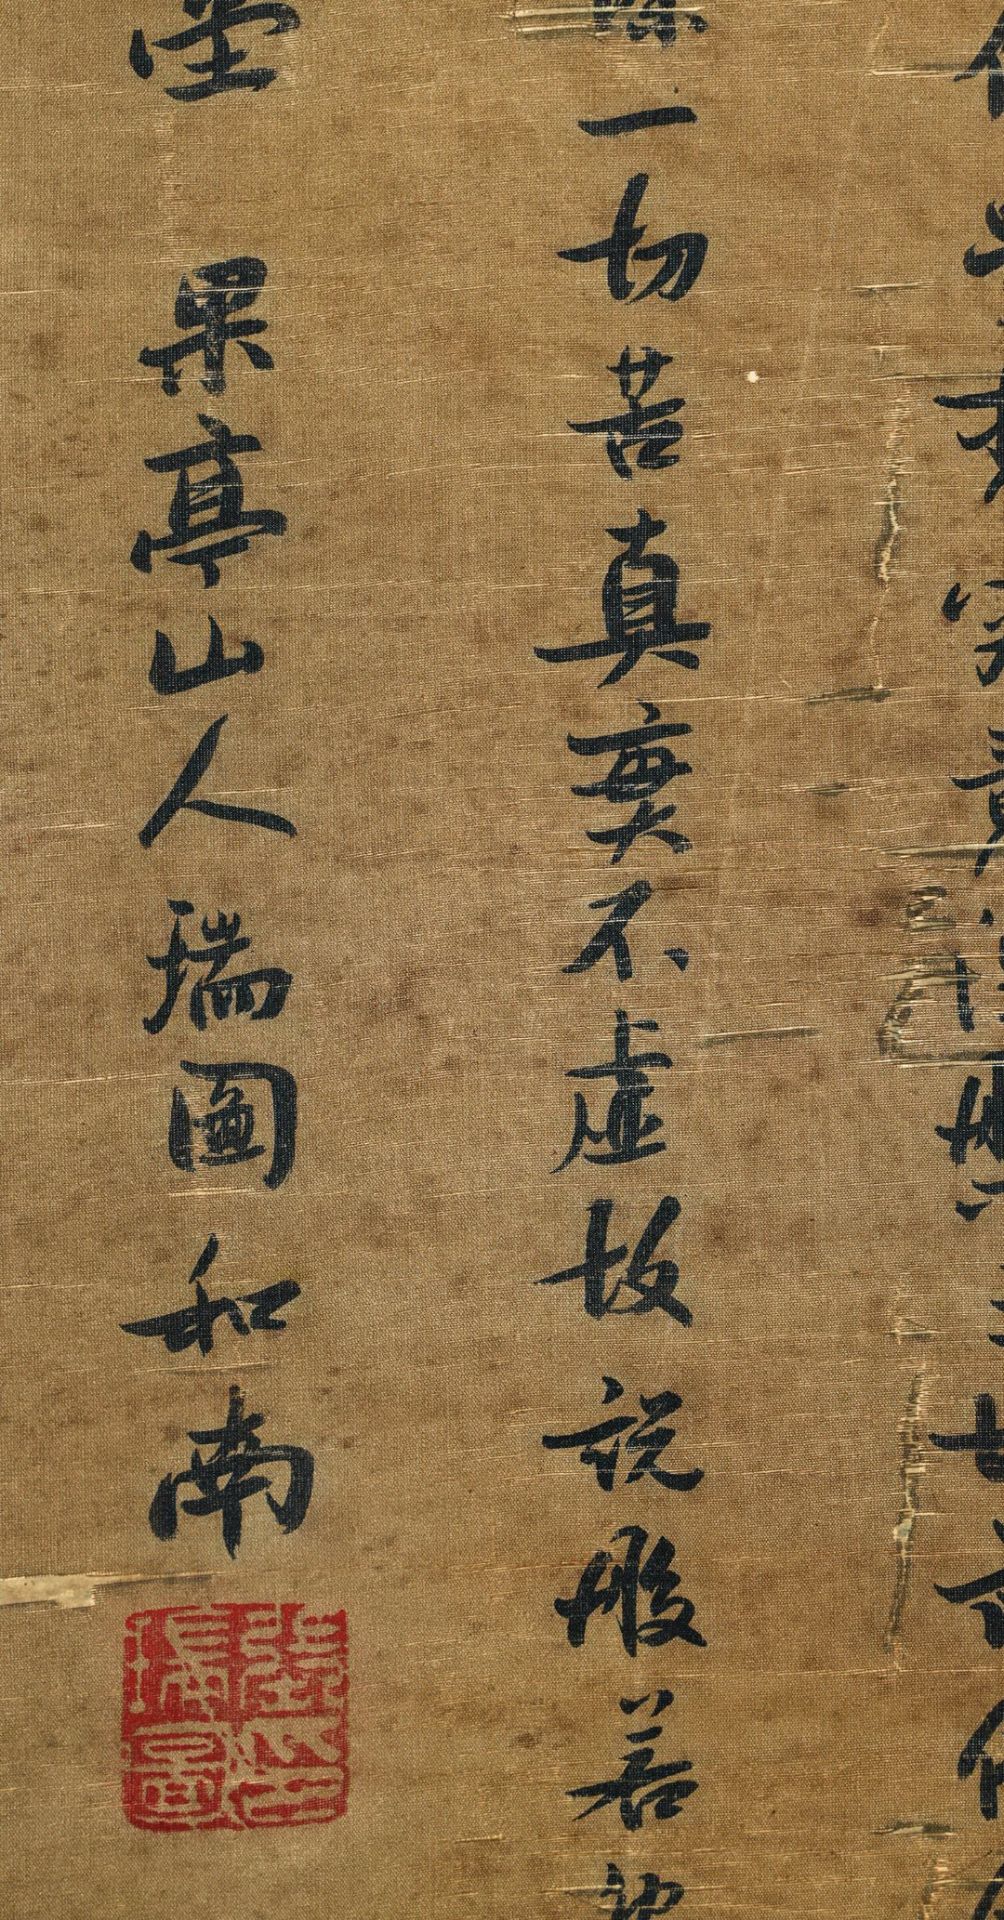 A Chinese Scroll Calligraphy By Zhang Ruitu - Image 7 of 12